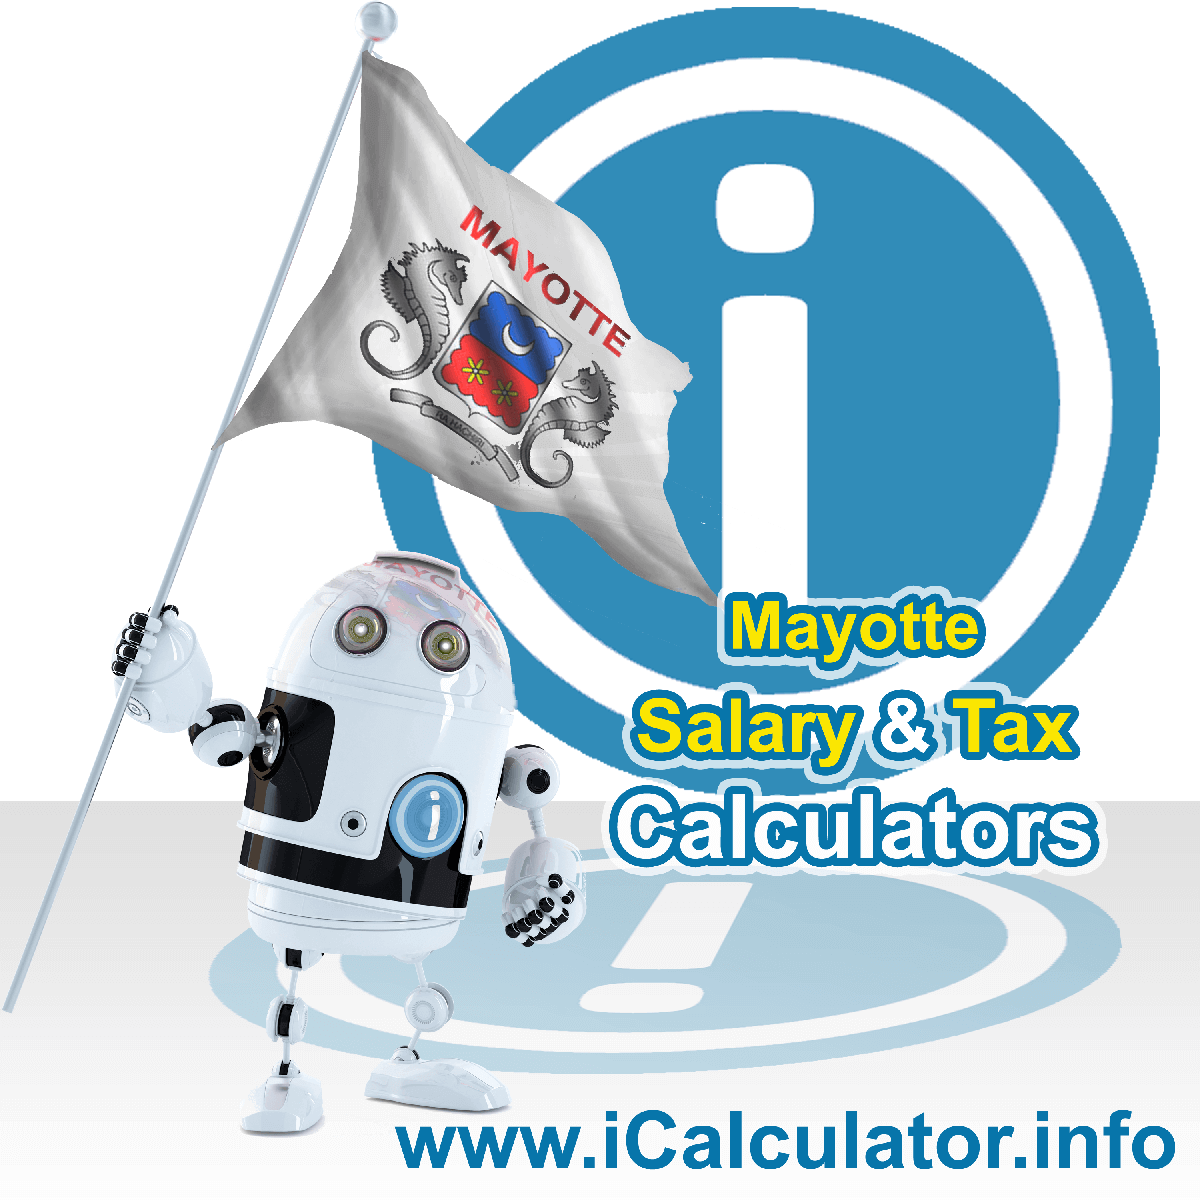 Mayotte Salary Calculator. This image shows the Mayotteese flag and information relating to the tax formula for the Mayotte Tax Calculator